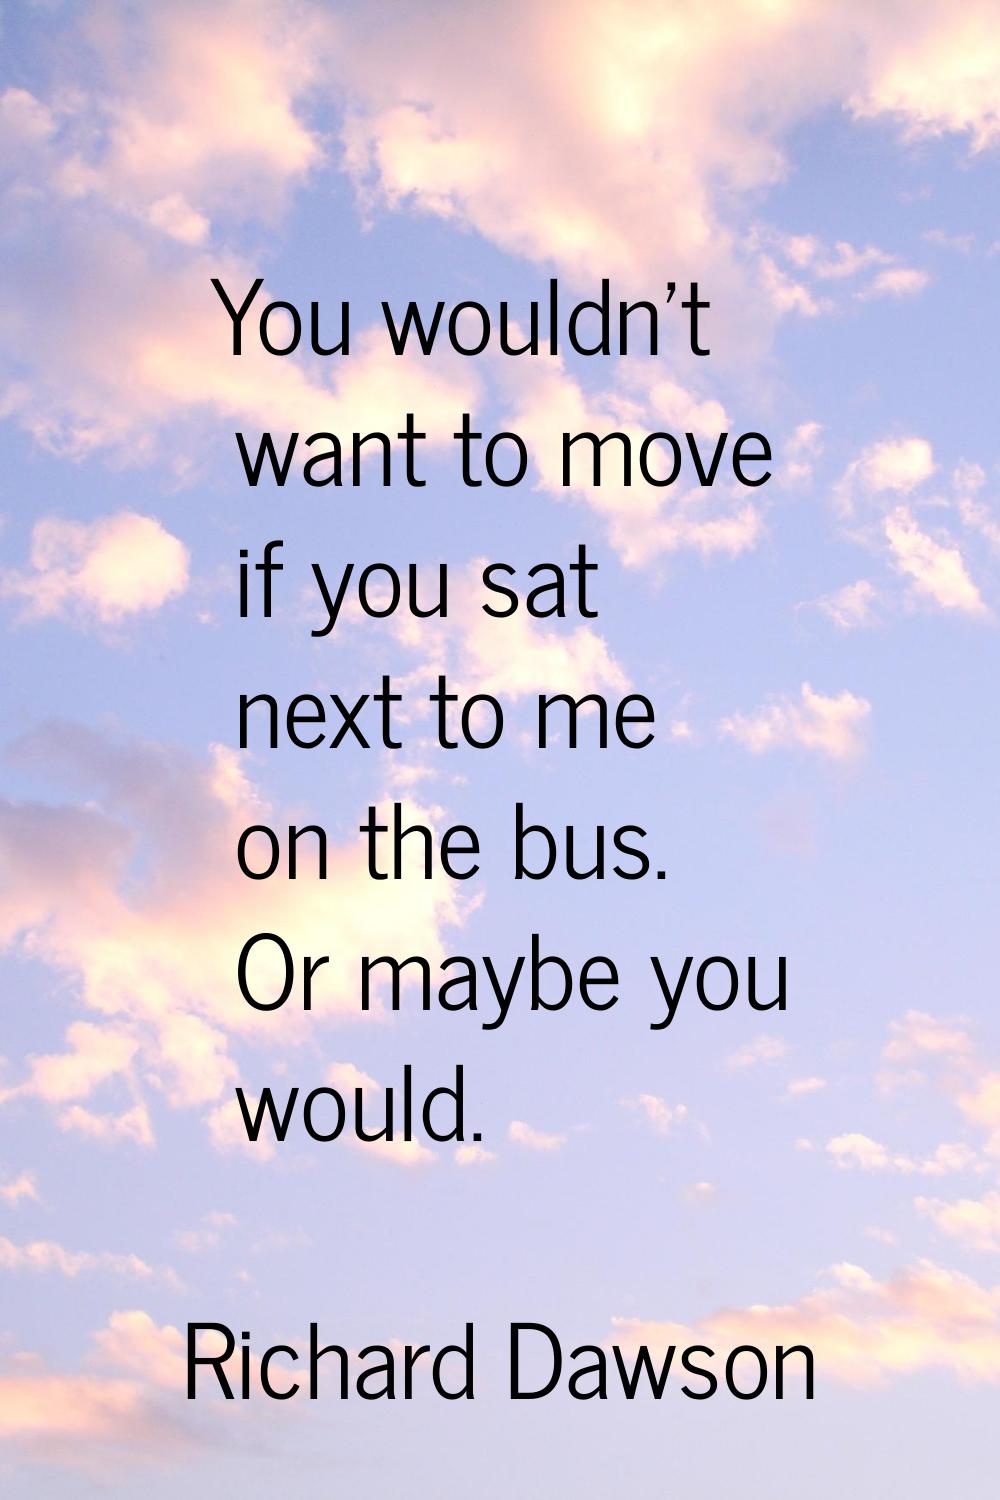 You wouldn't want to move if you sat next to me on the bus. Or maybe you would.